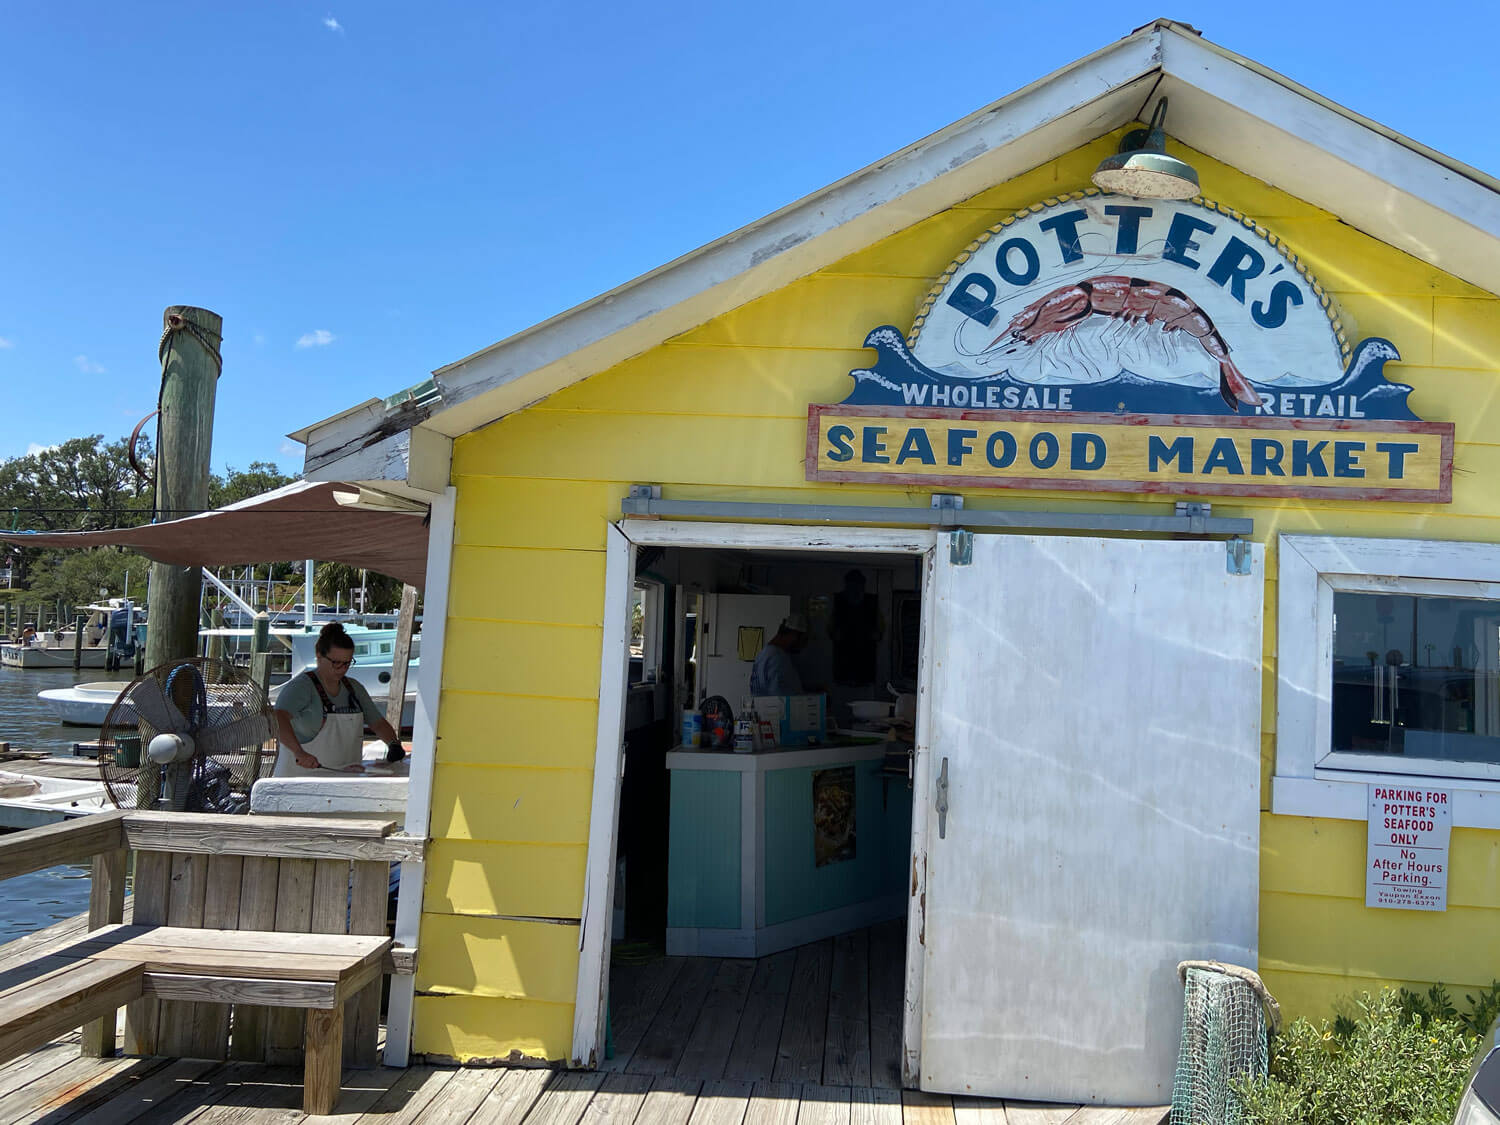 Potters Seafood - Southport, NC